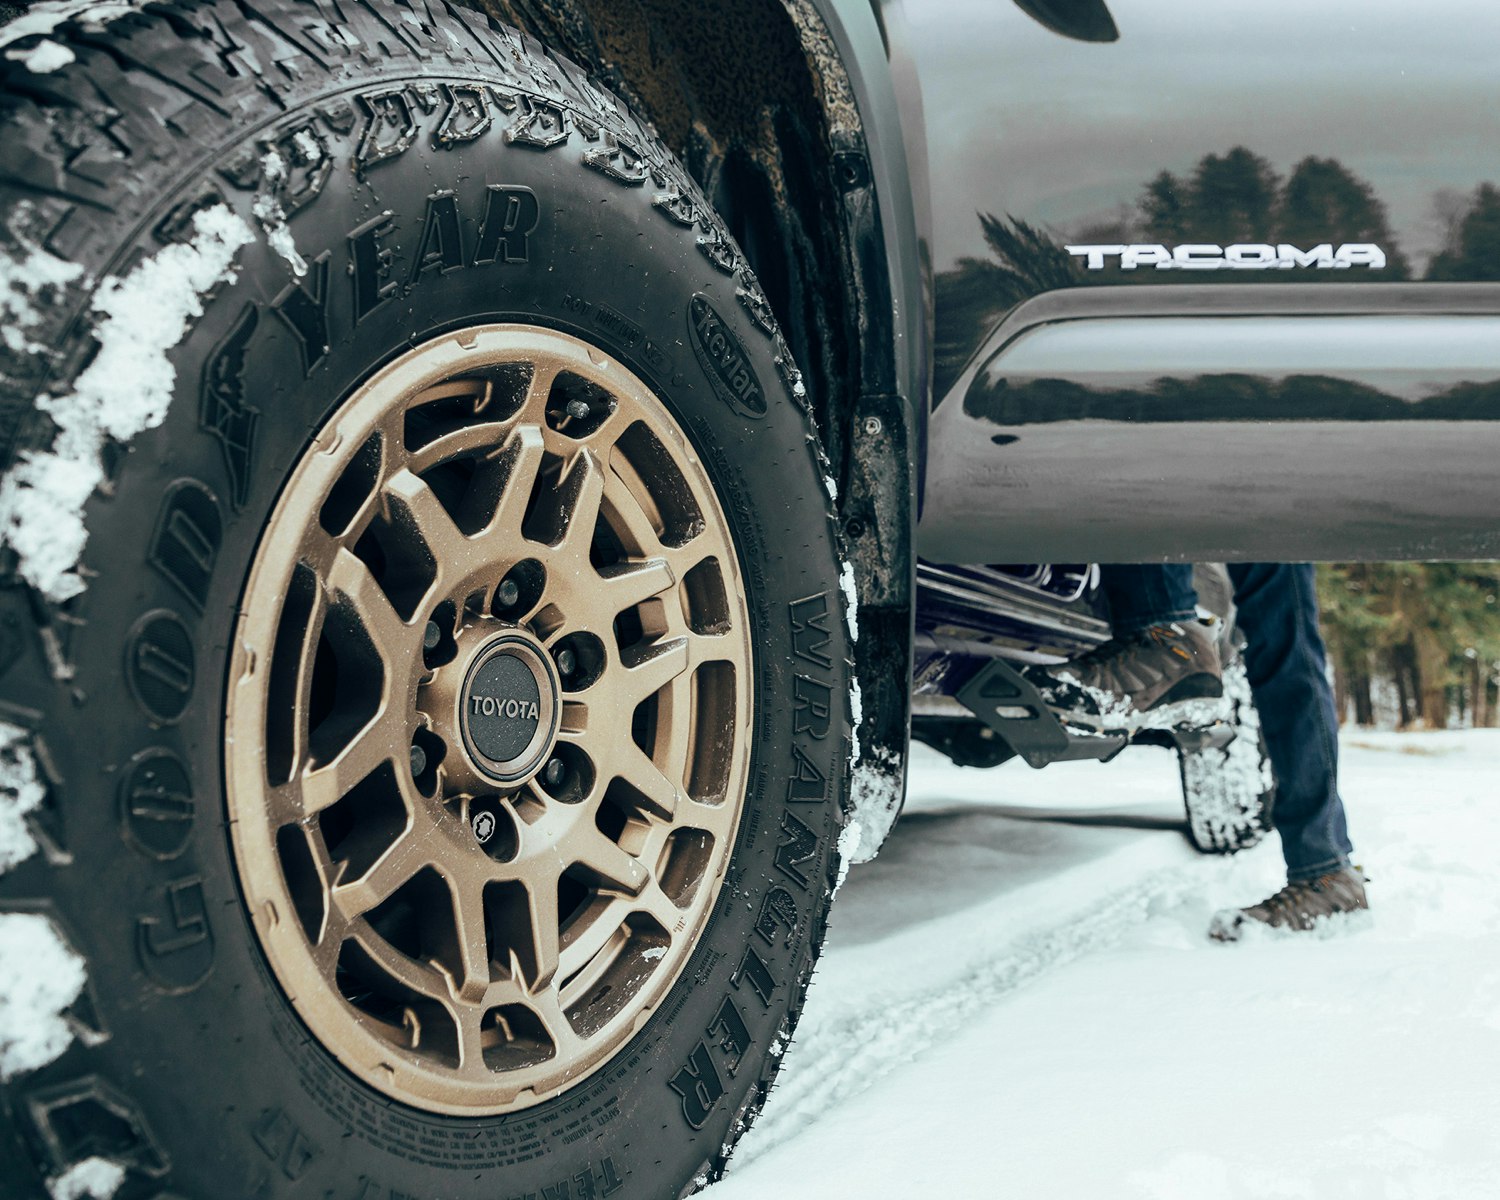 a close up of one of the wheels on a Toyota Tacoma in winter